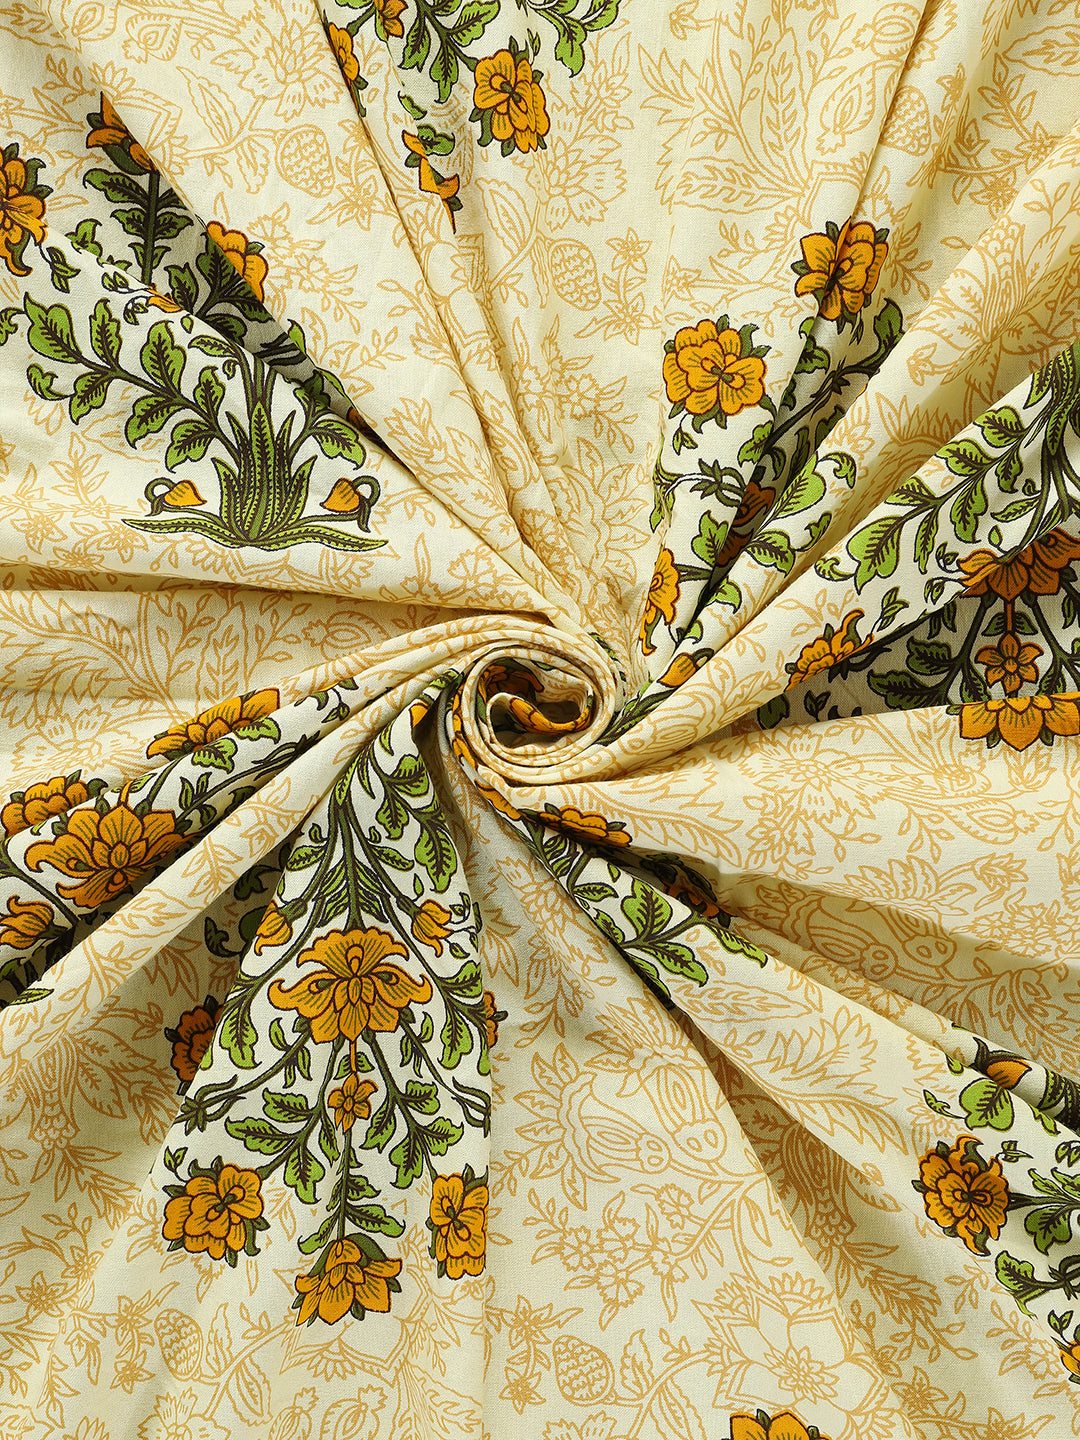 Yellow Cotton Floral Printed Bedsheets For Double Bed Queen Size